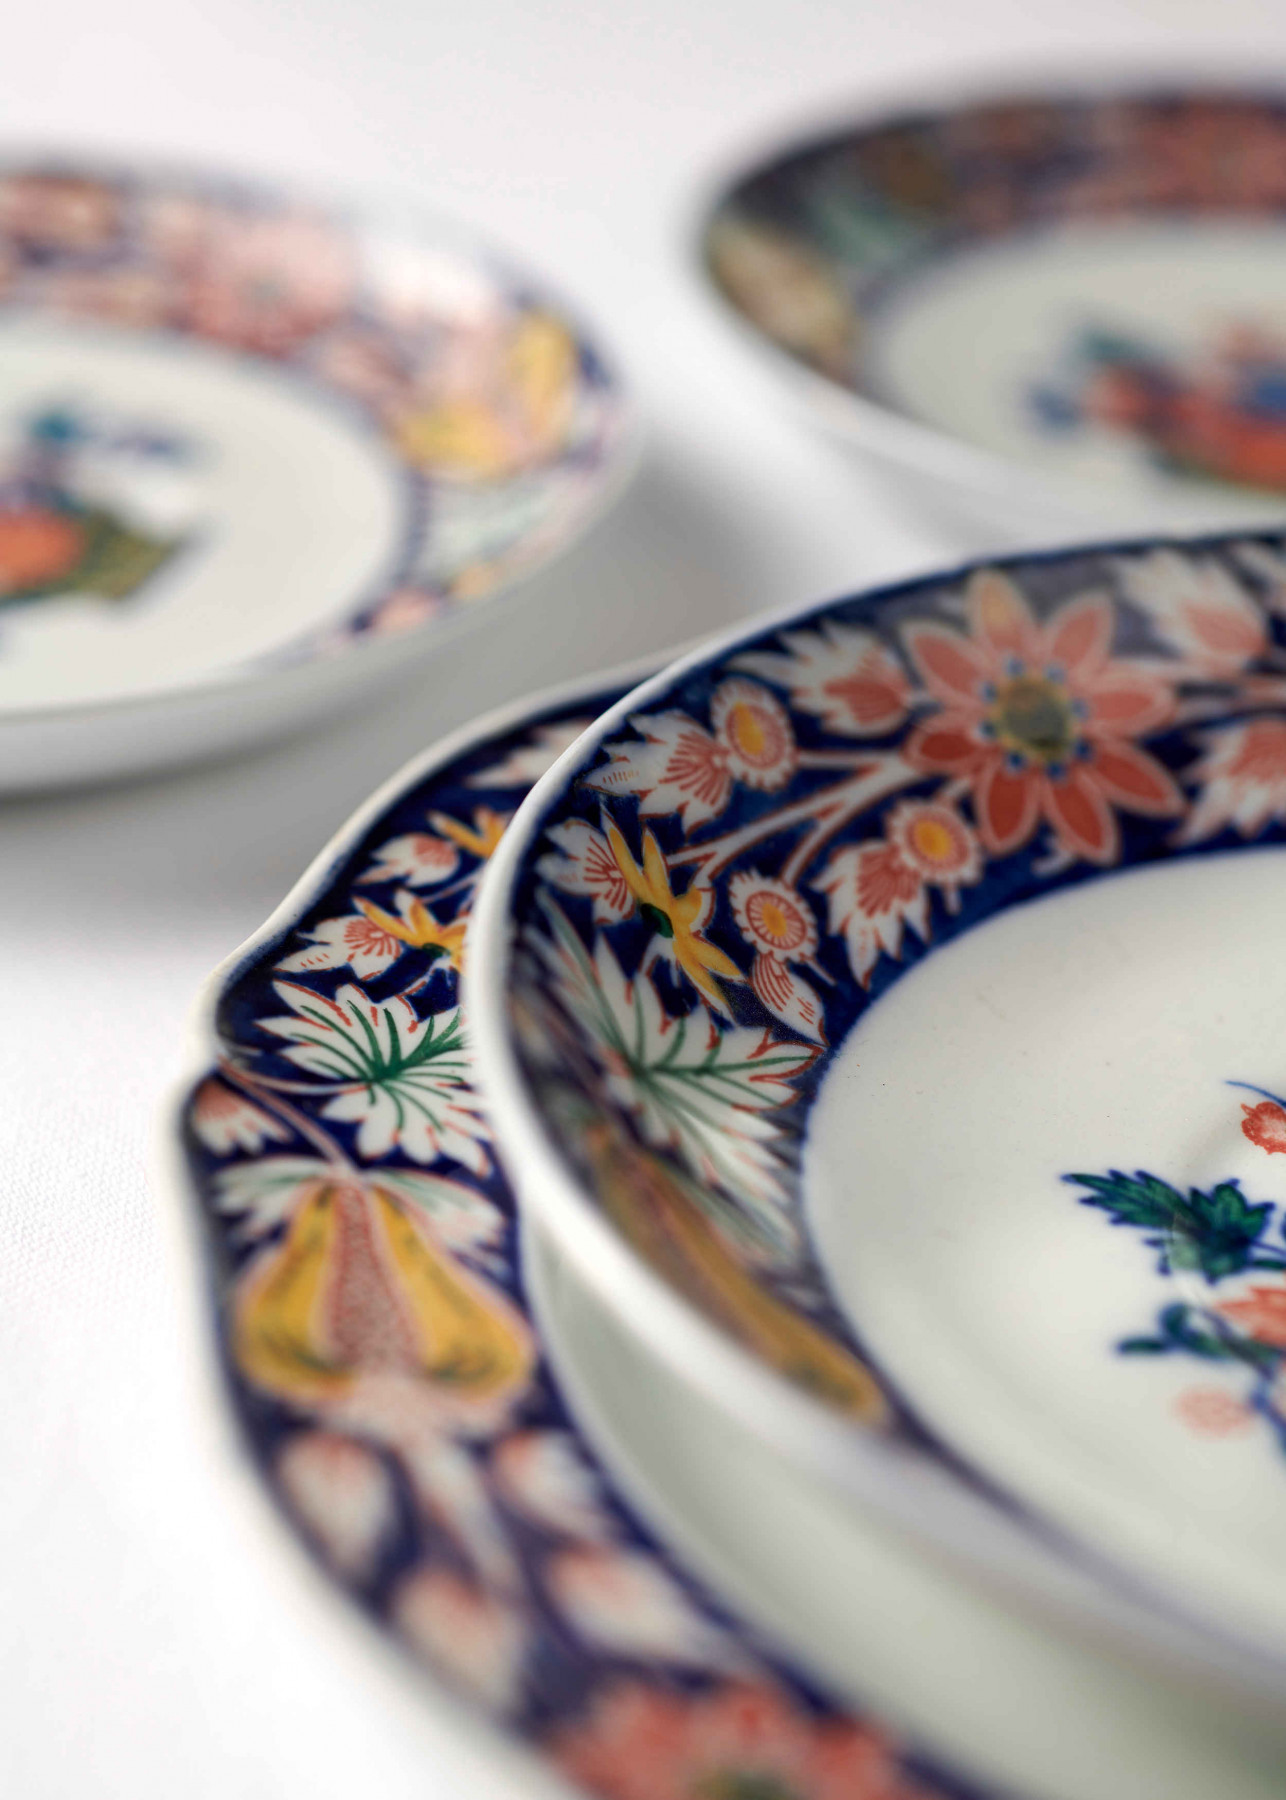 Items from Badrutt's Palace Hotel's Wedgwood collection featuring the Poterat Etruria pattern